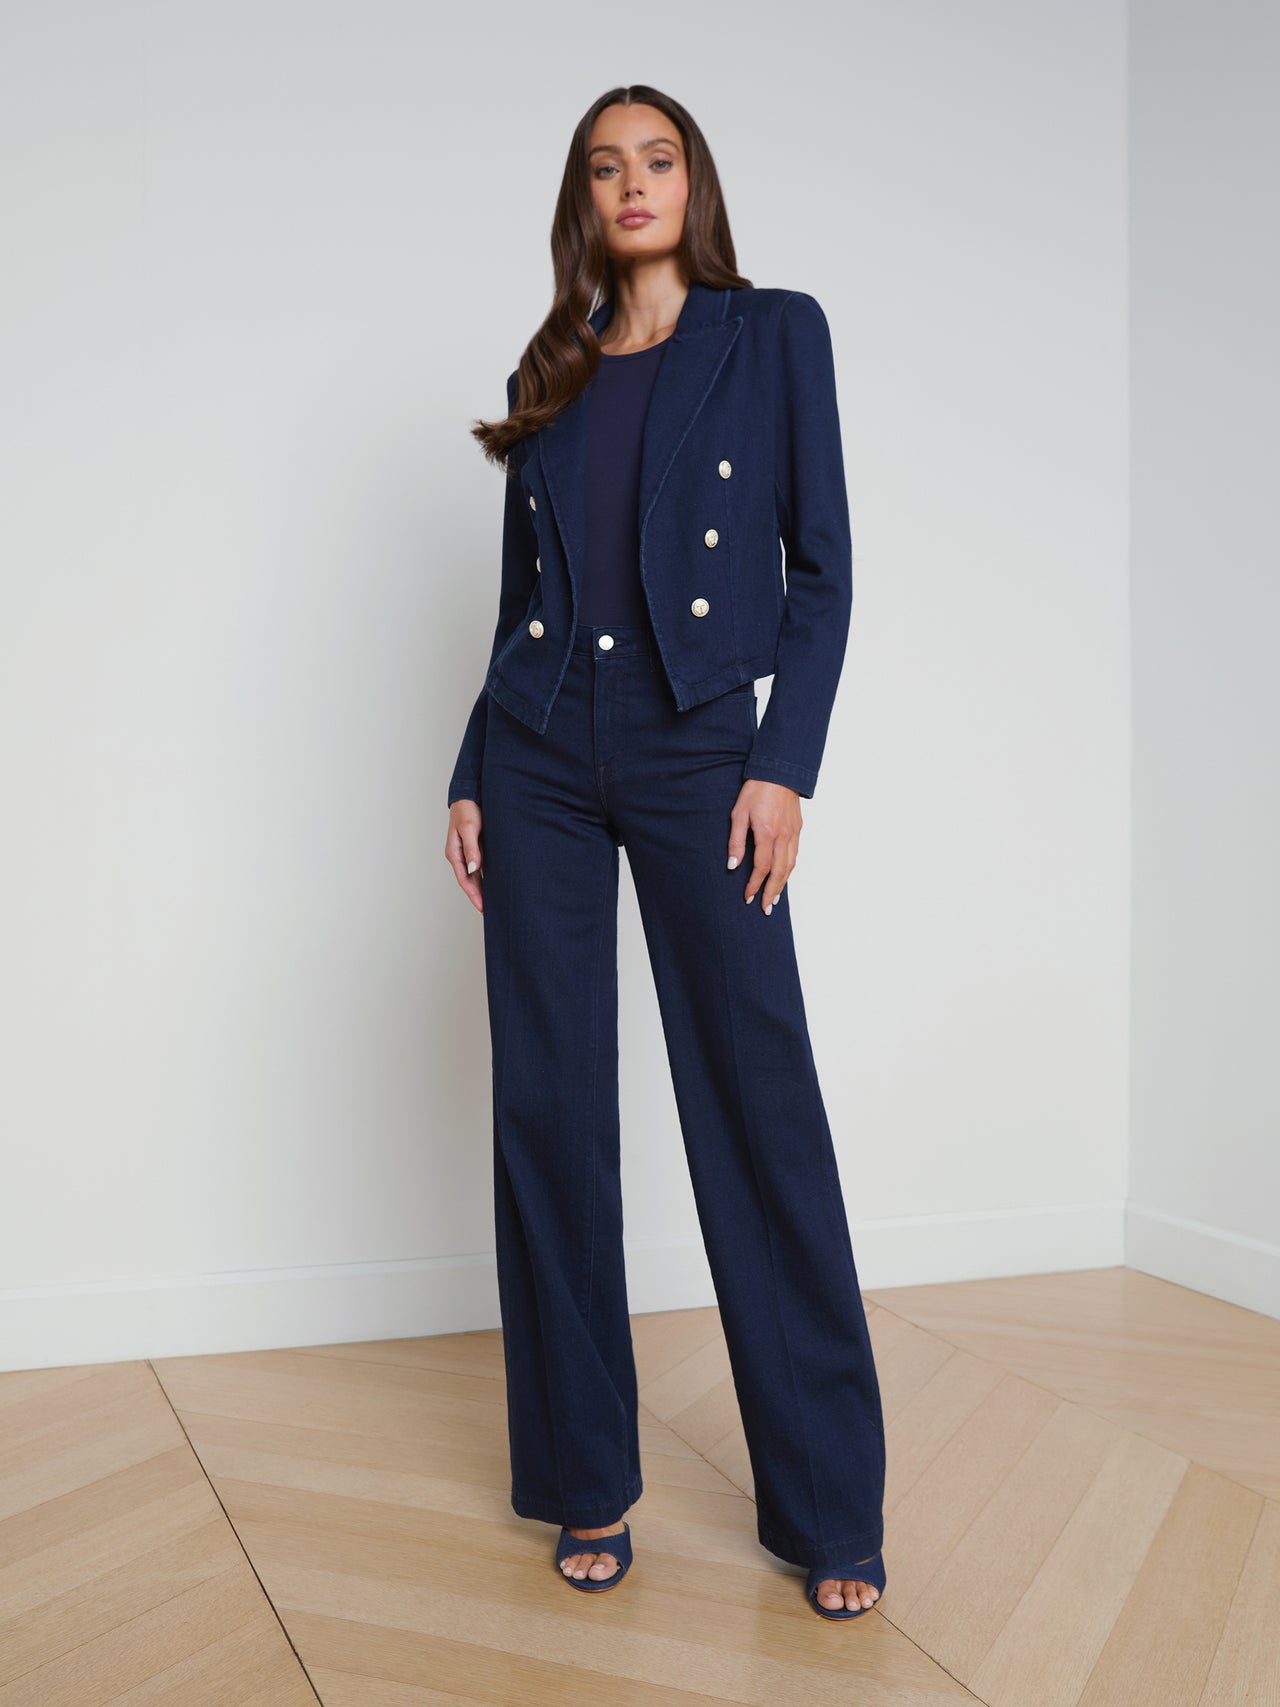 L'AGENCE - Spring 2024 Collection of Ready-To-Wear & Denim